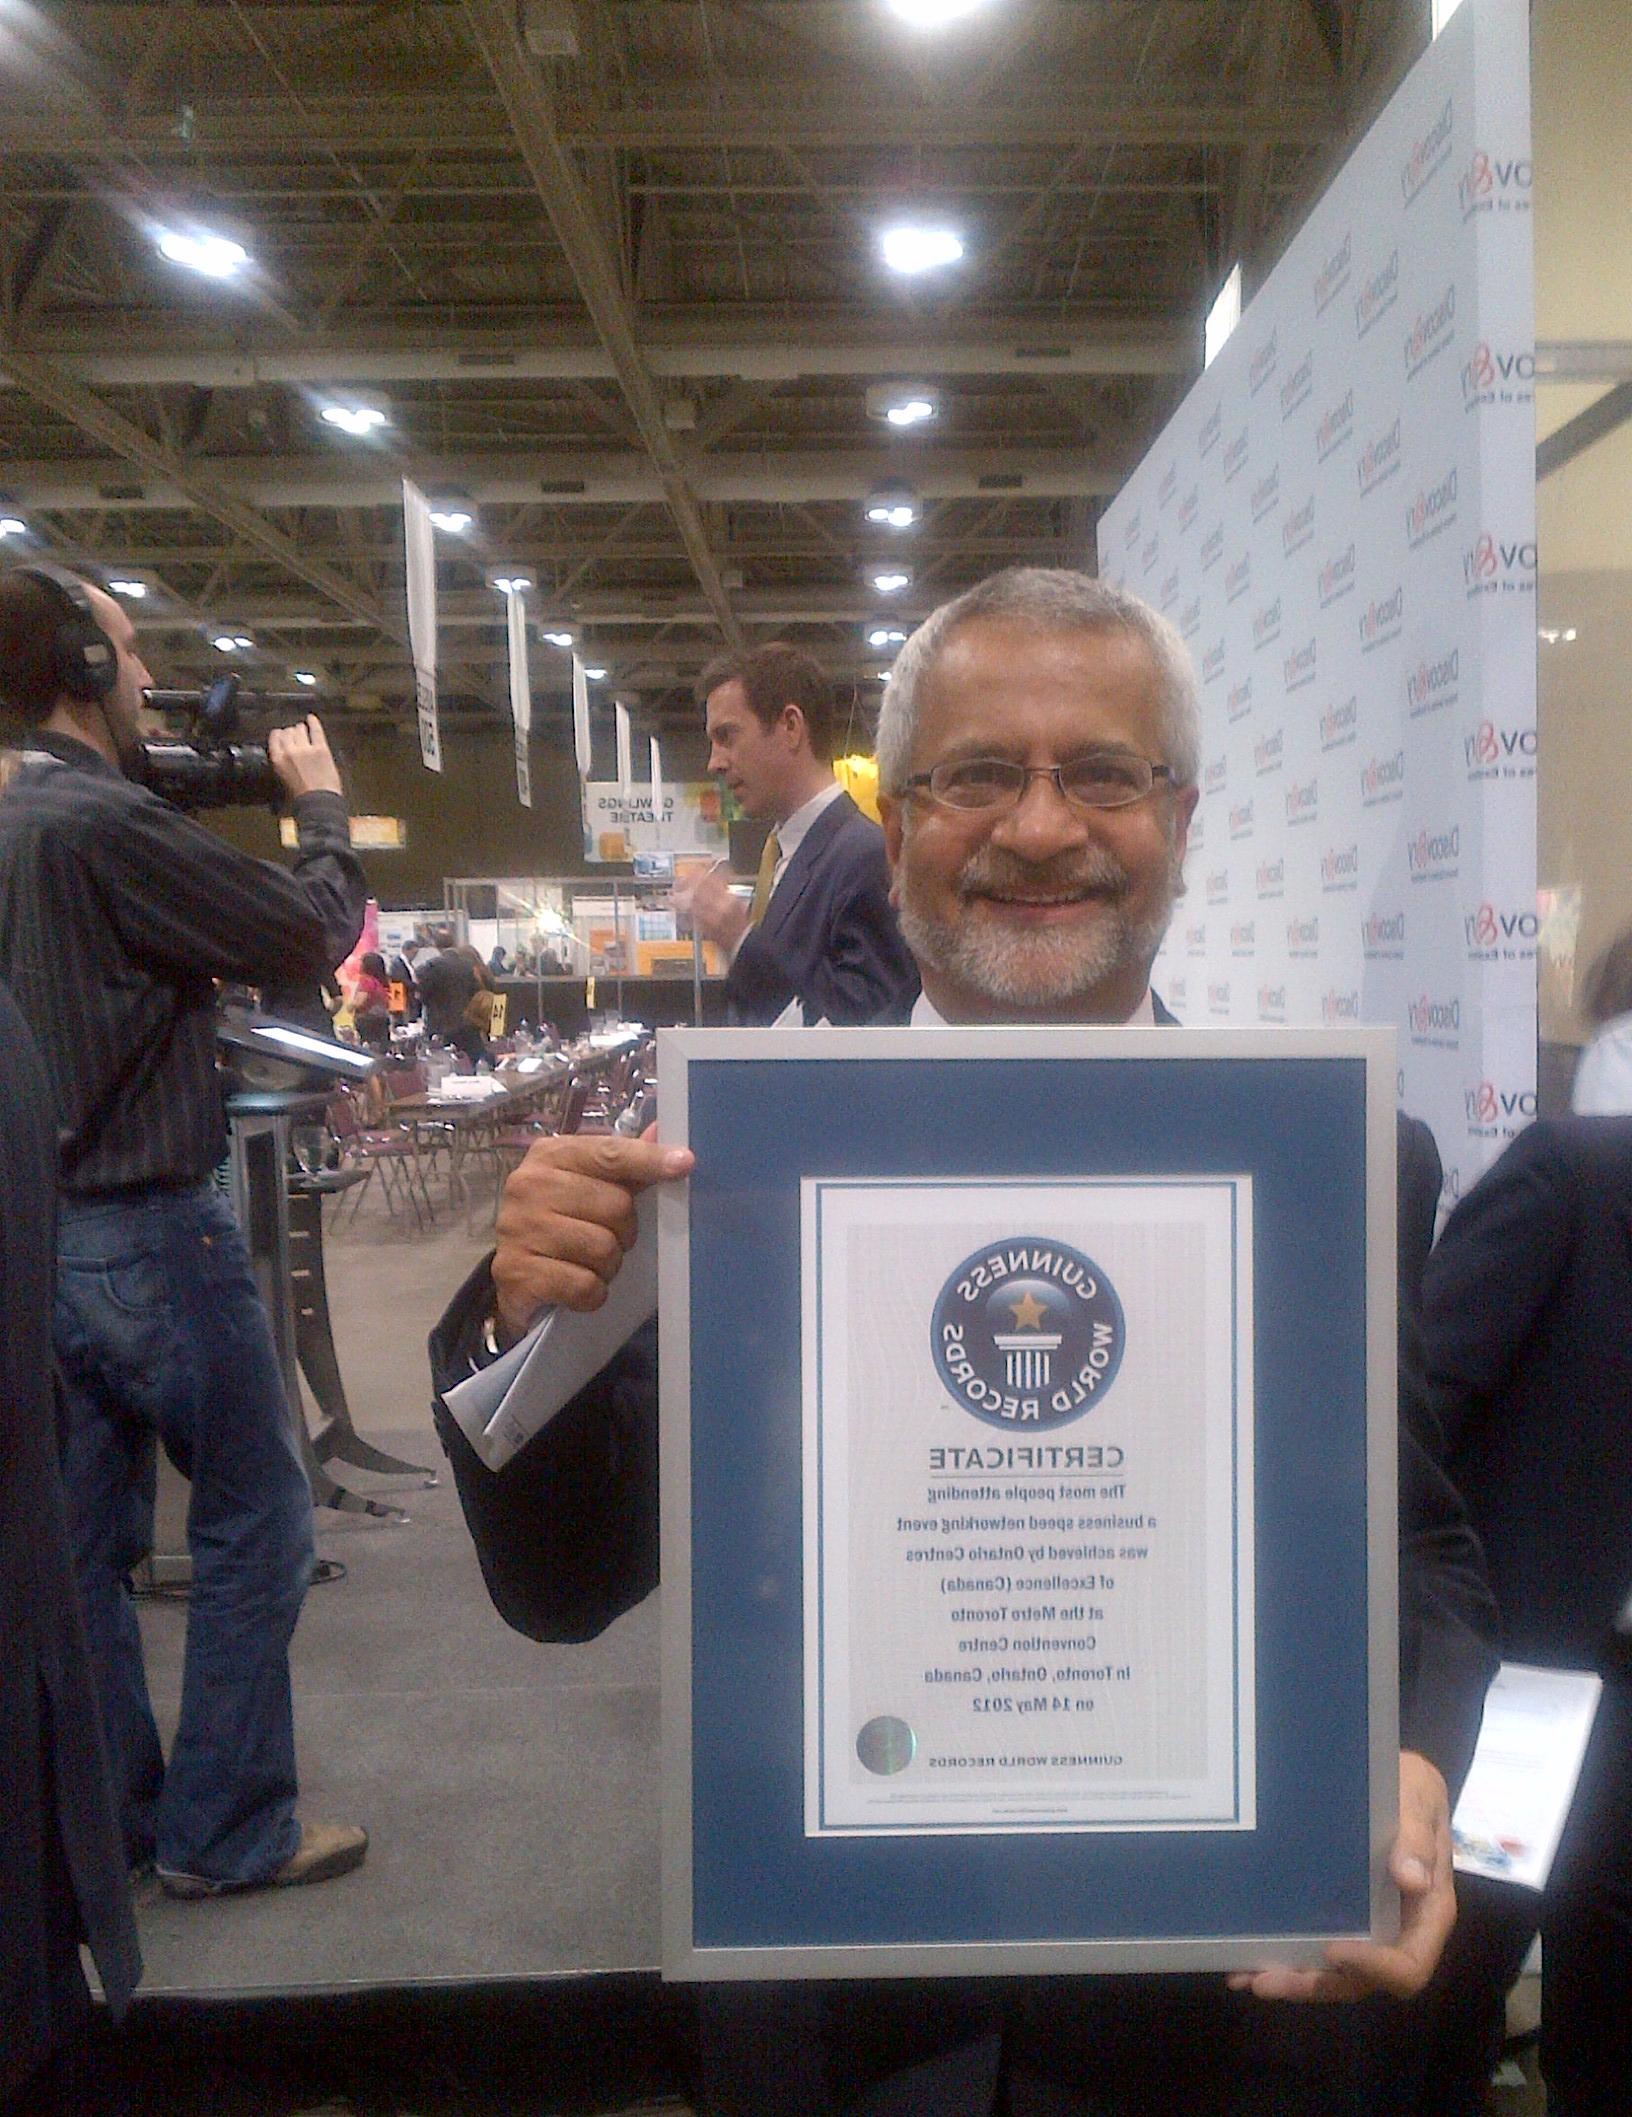 This is an image of Professor Nathwani holding the Guiness World Record Certificate at the Ontario Centres of Excellence Discover 12 Conference